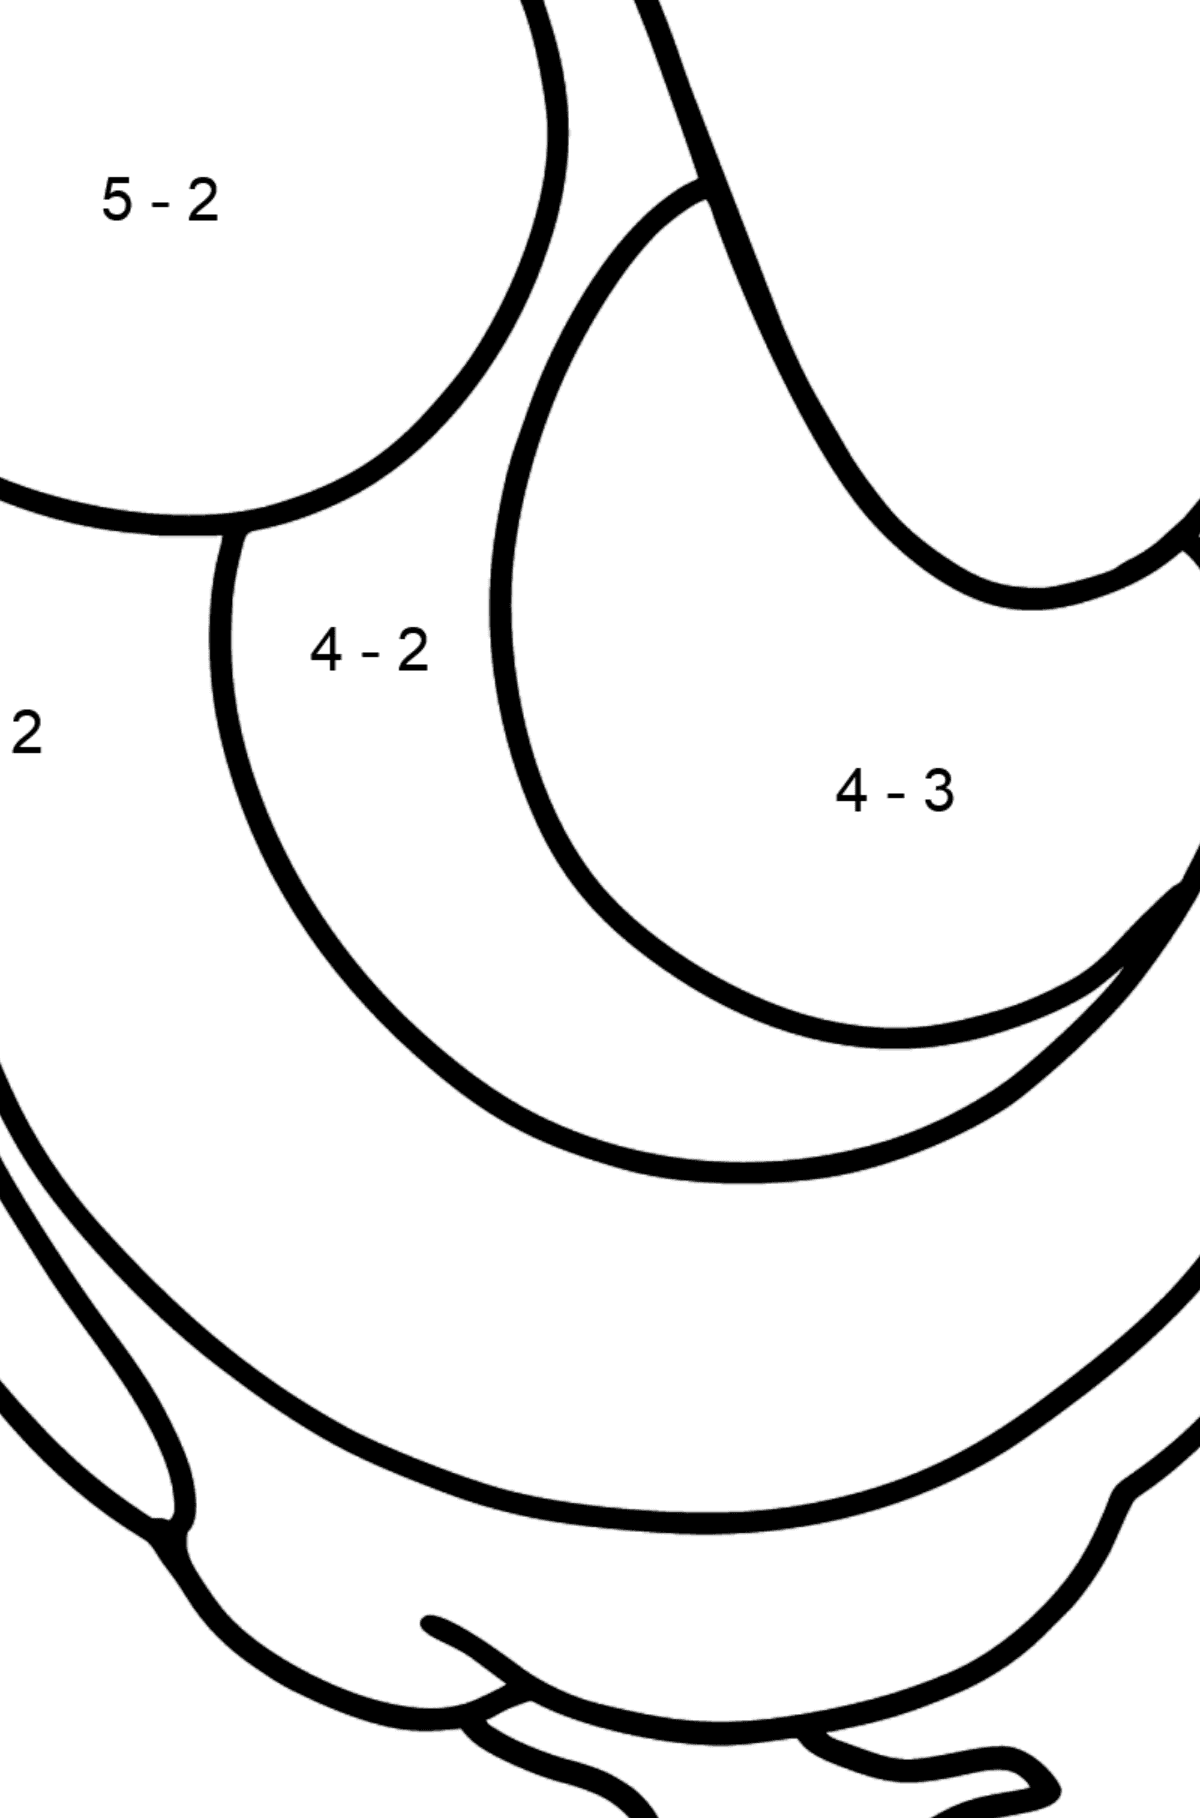 Simple coloring page with a Tit - Math Coloring - Subtraction for Kids